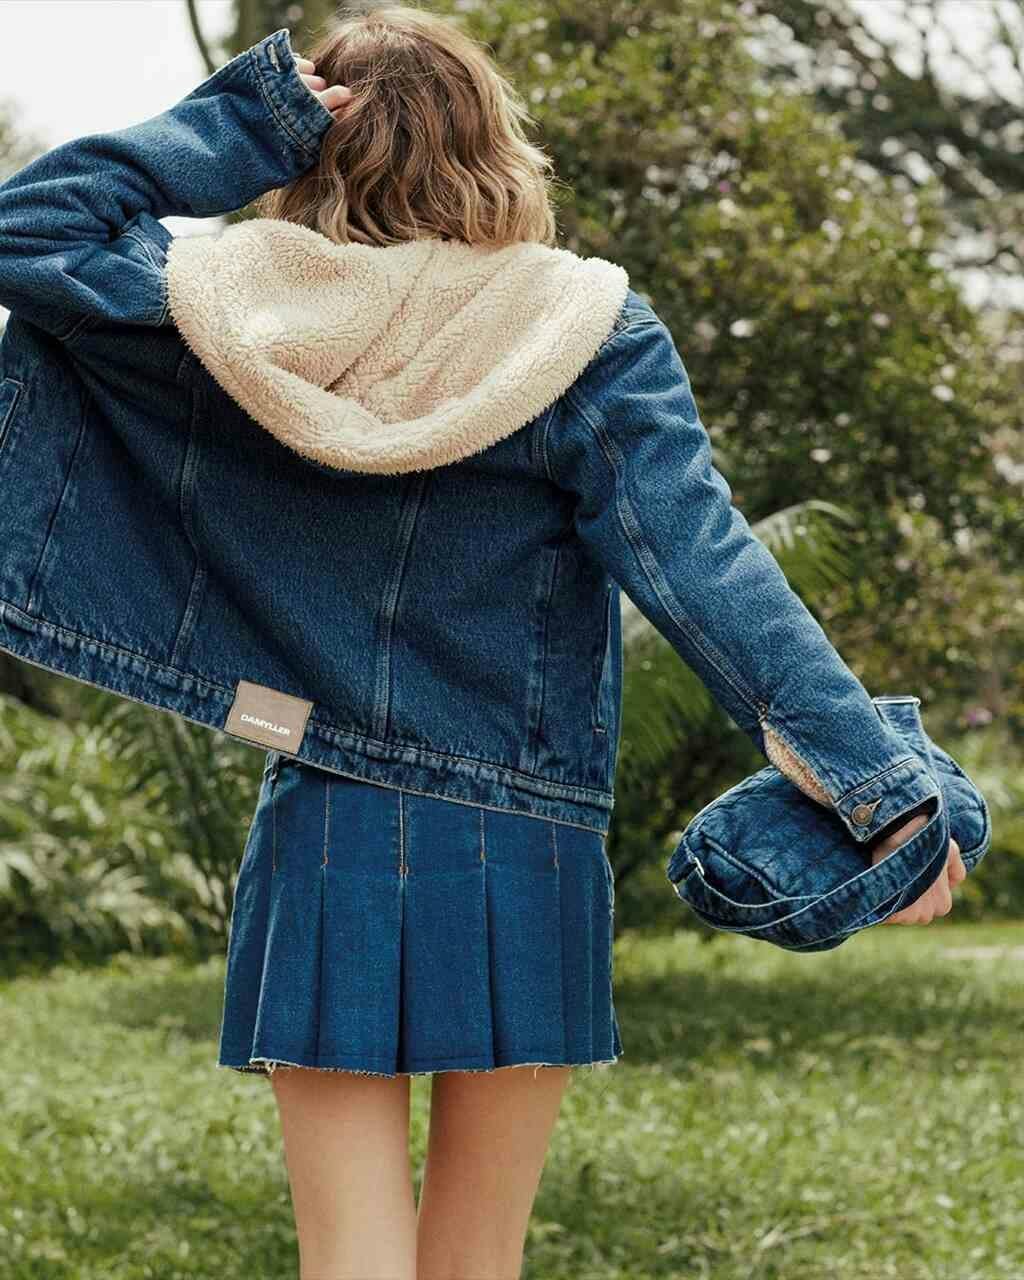 clothing pants jeans coat female girl person teen scarf jacket